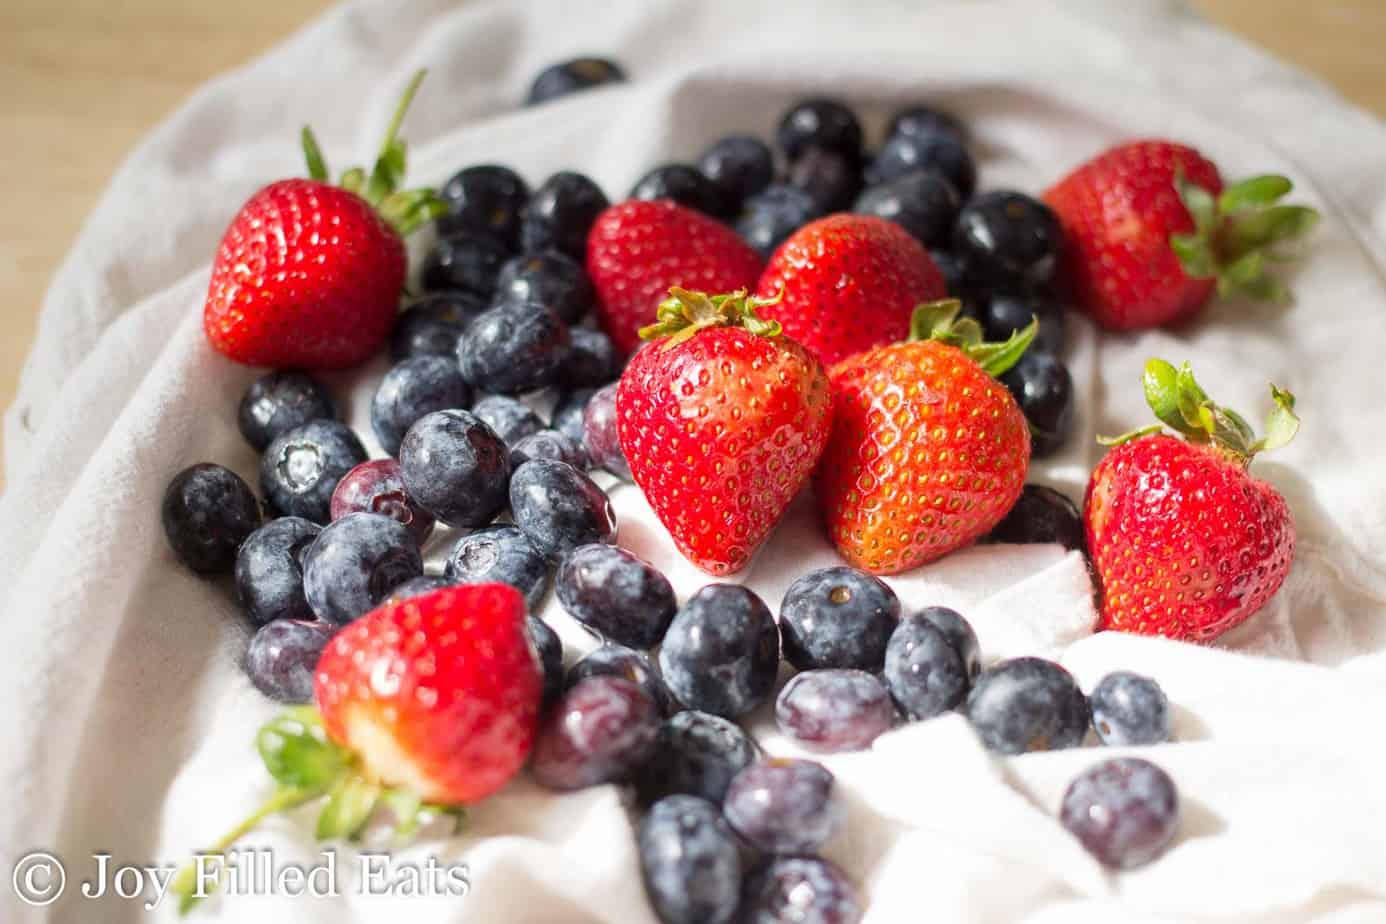 pile of fresh blueberries and strawberries